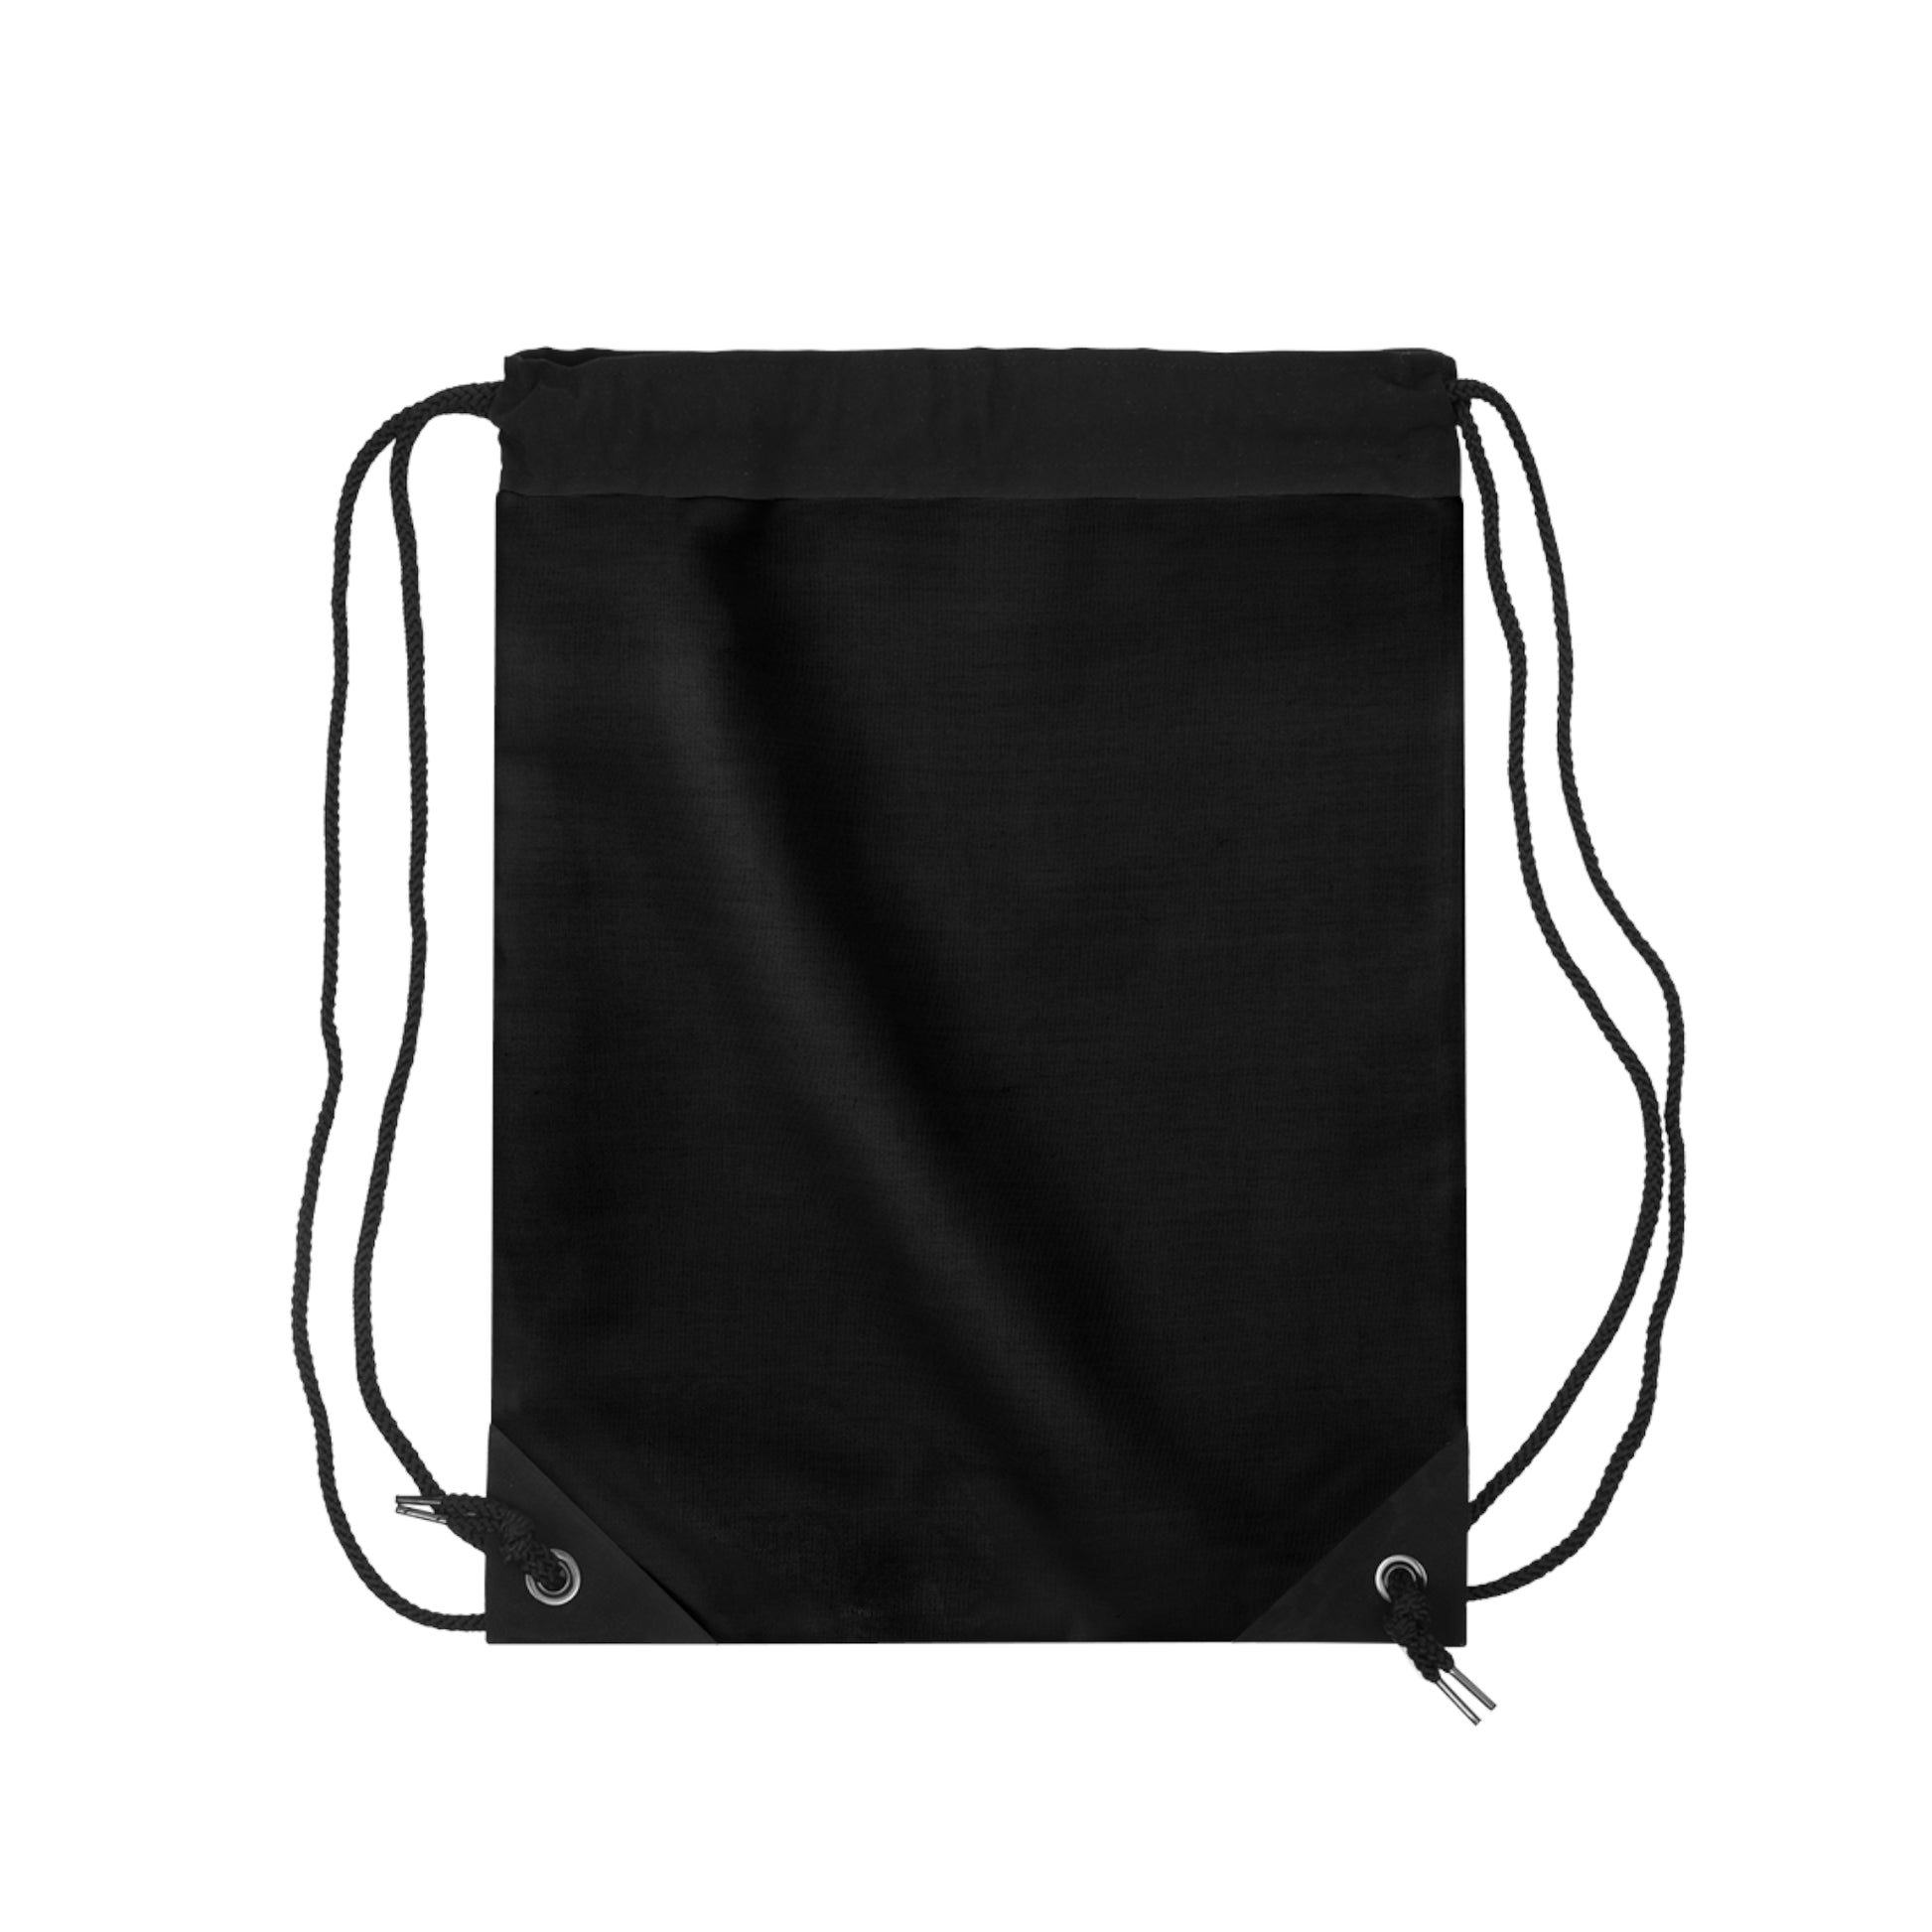 The Best Miracles Happen When You Trust God Christian Drawstring Bag Printify